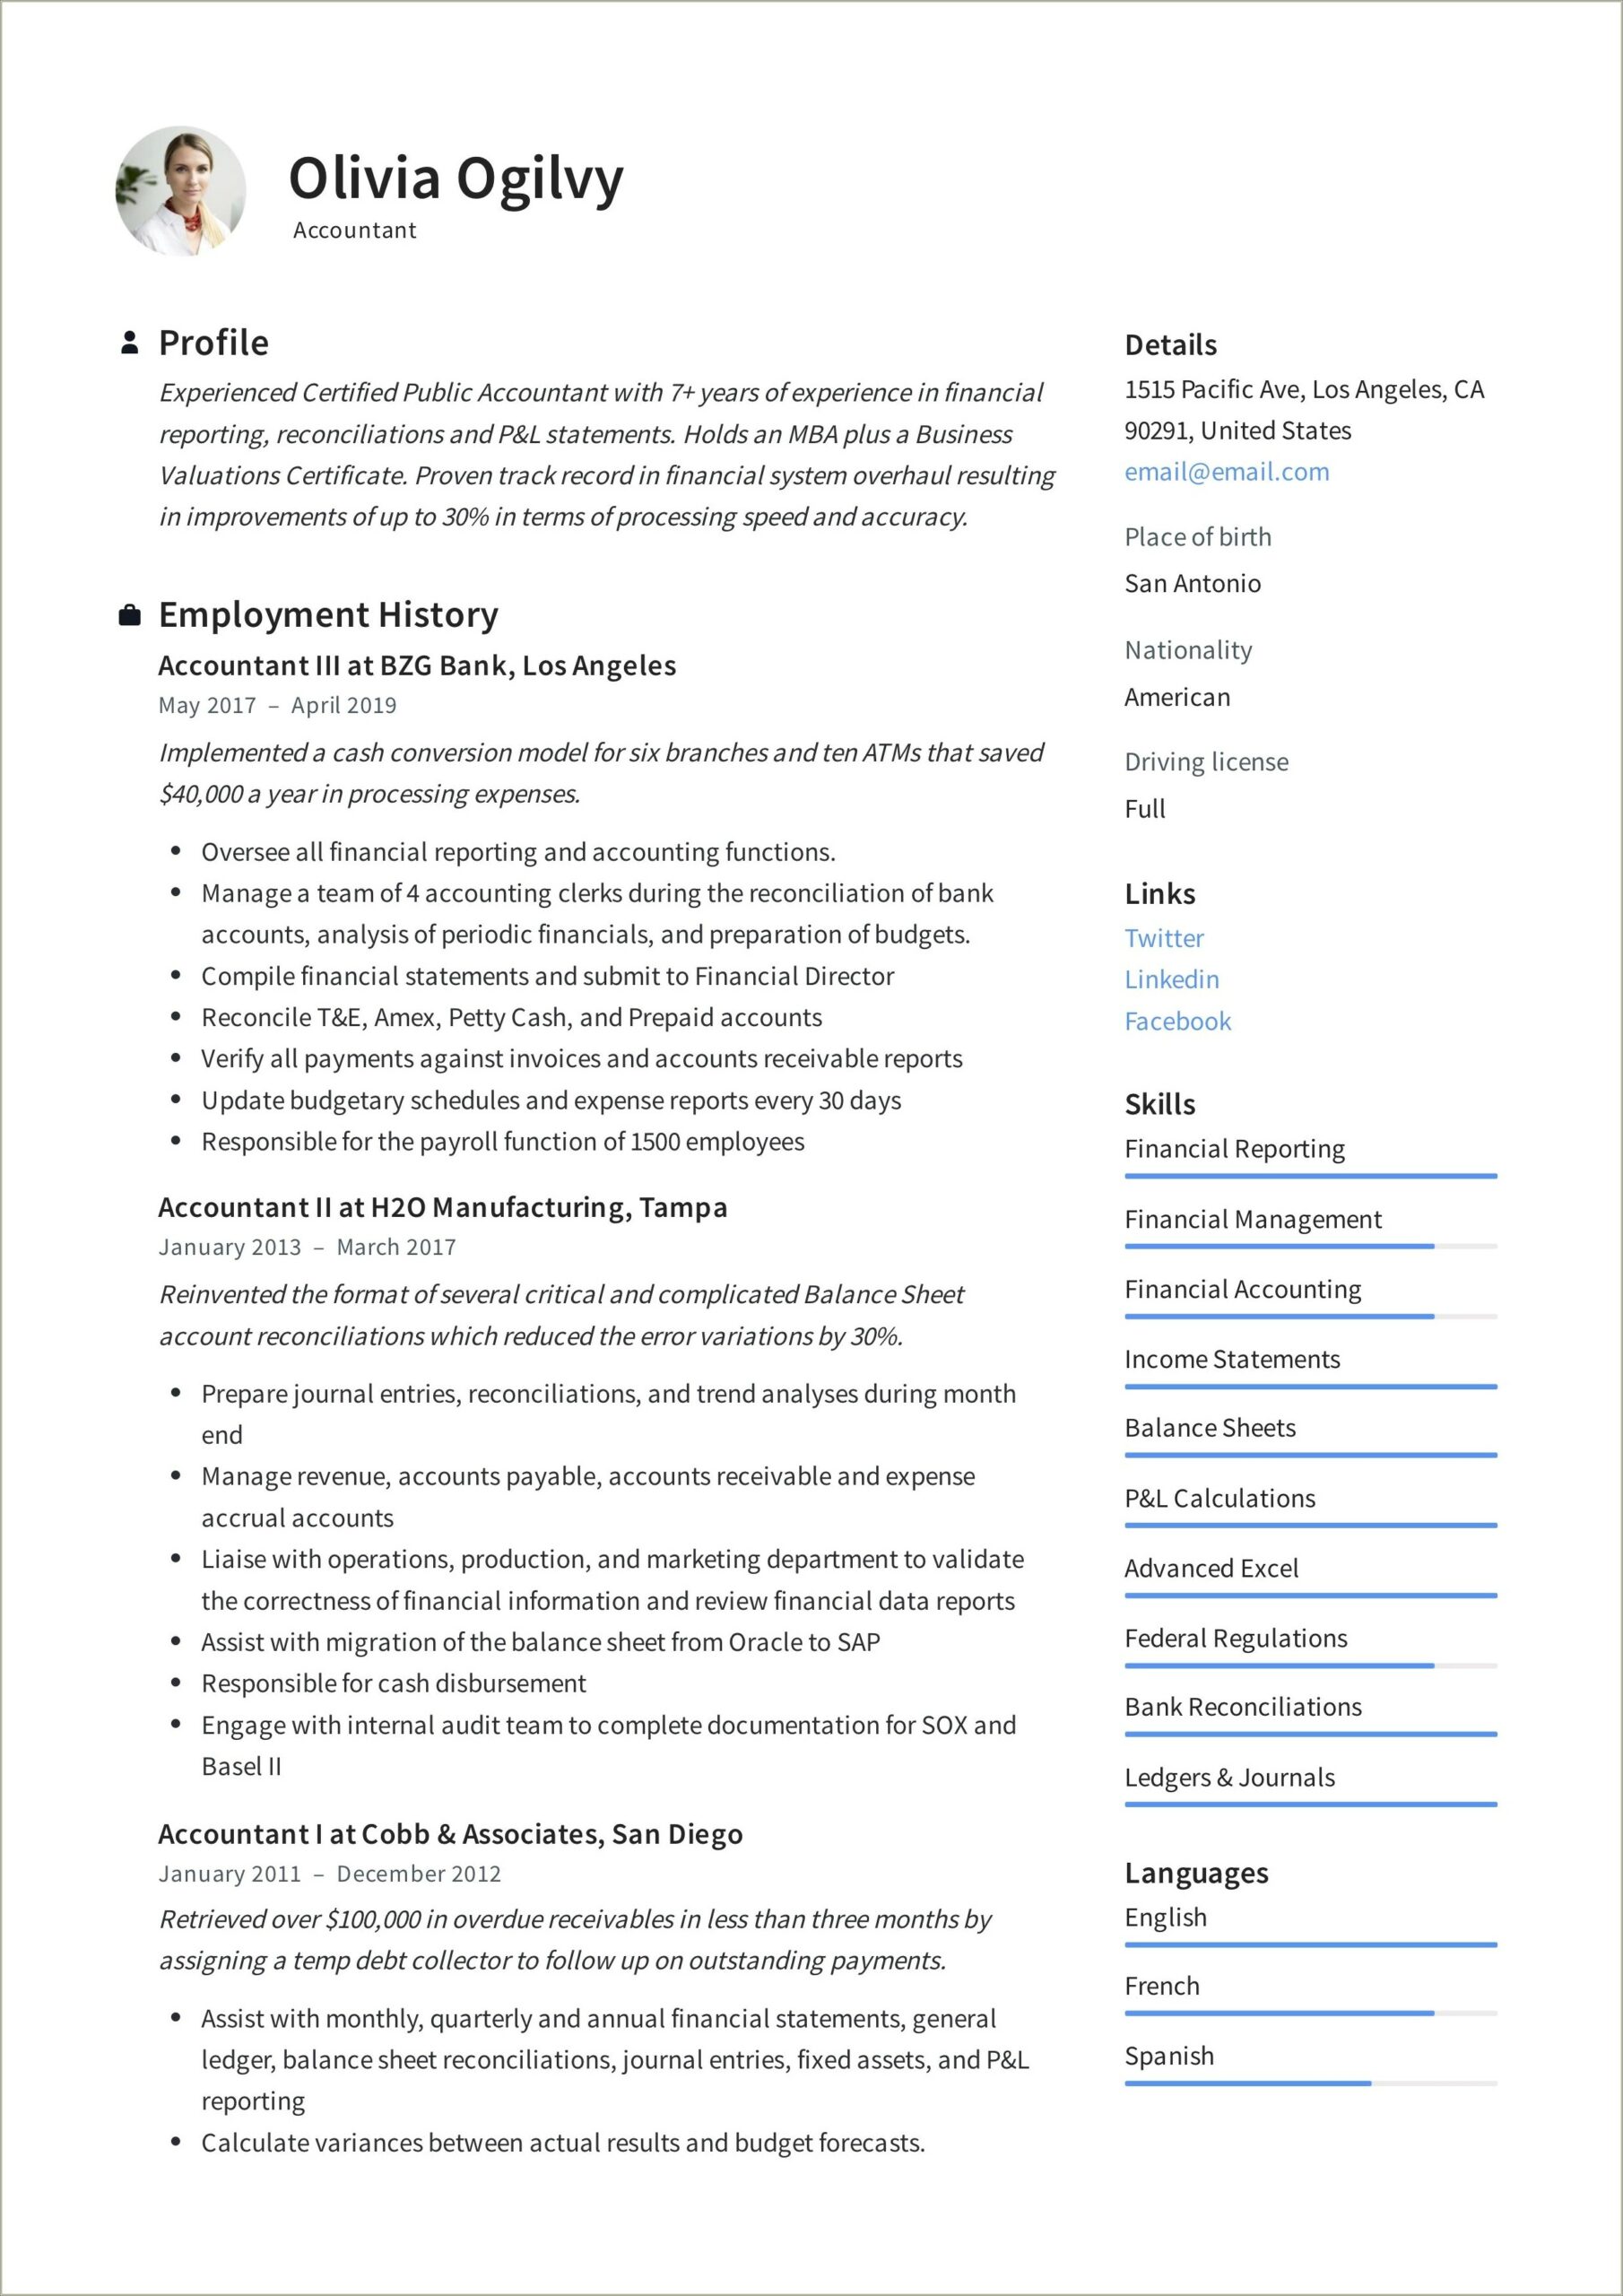 Resume Samples For Us Accounting Jobs